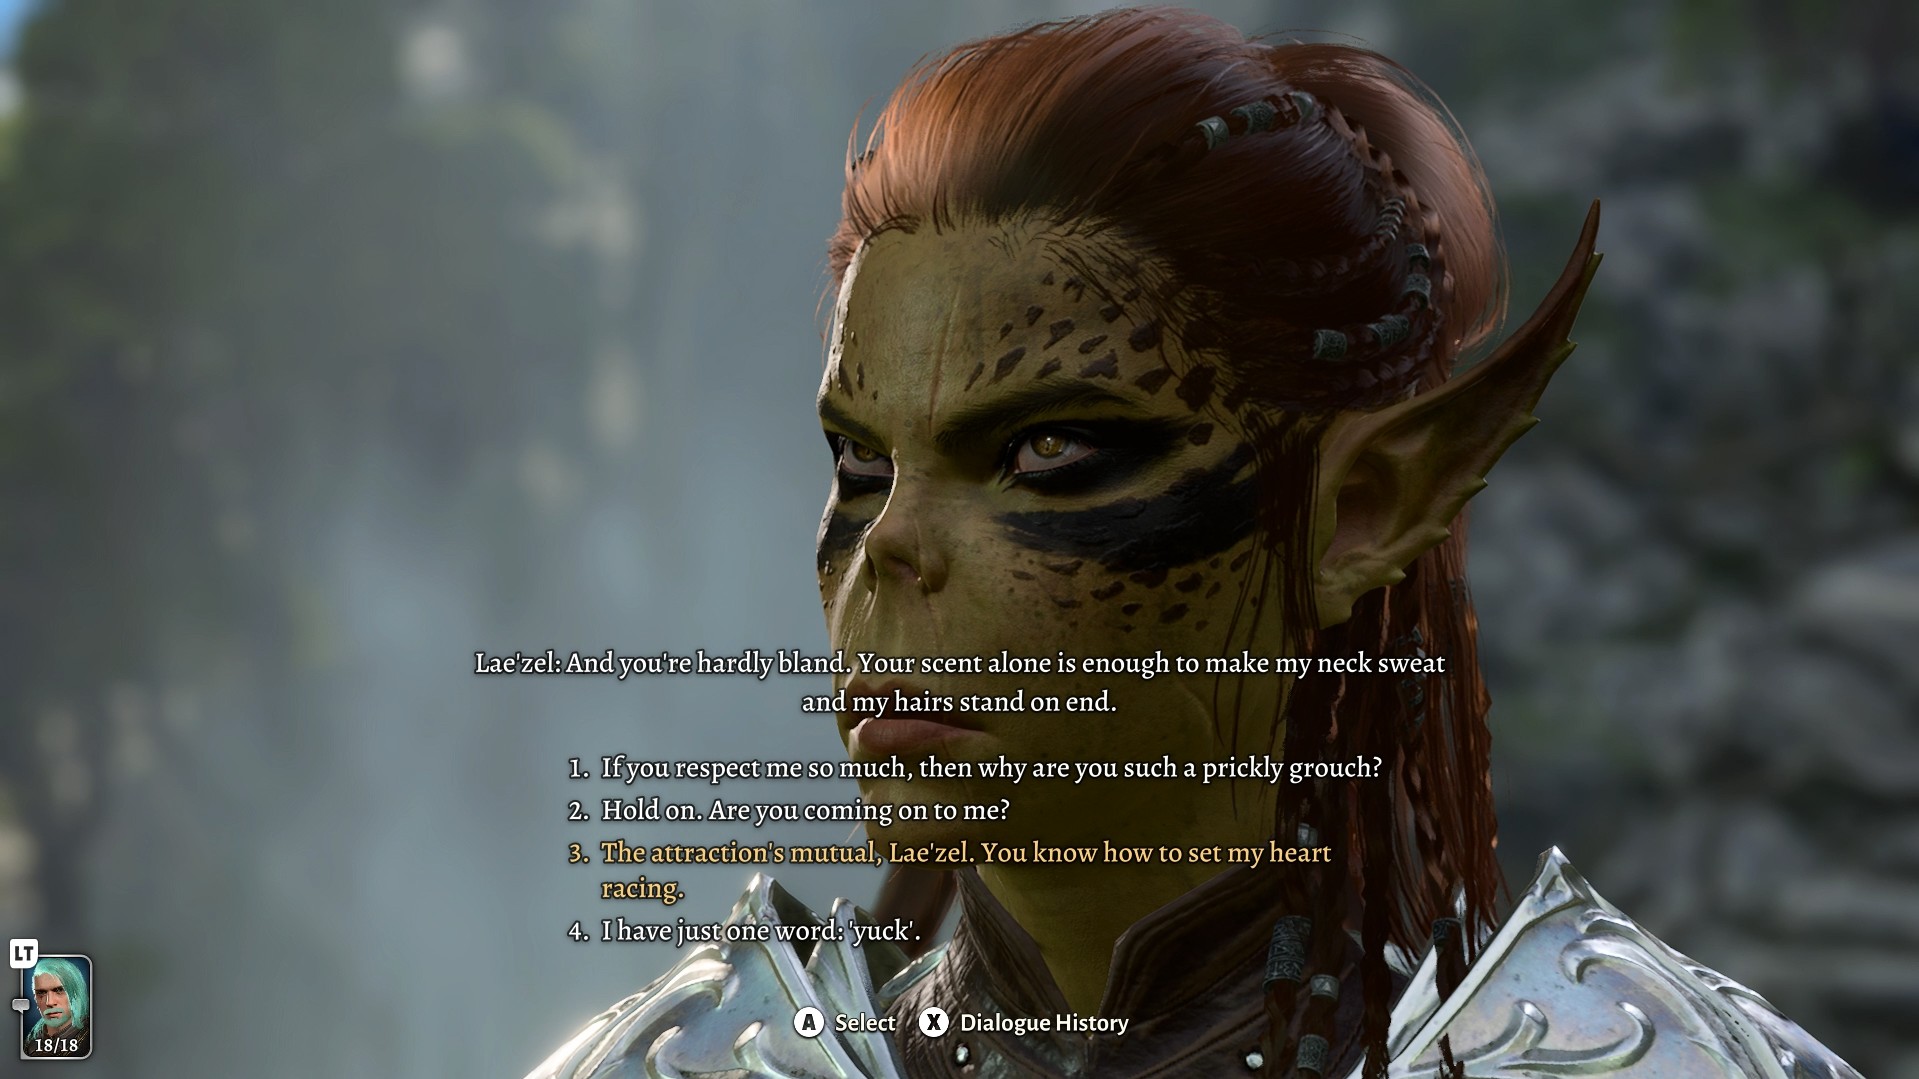 Lae'zel dialogue options to start a relationship